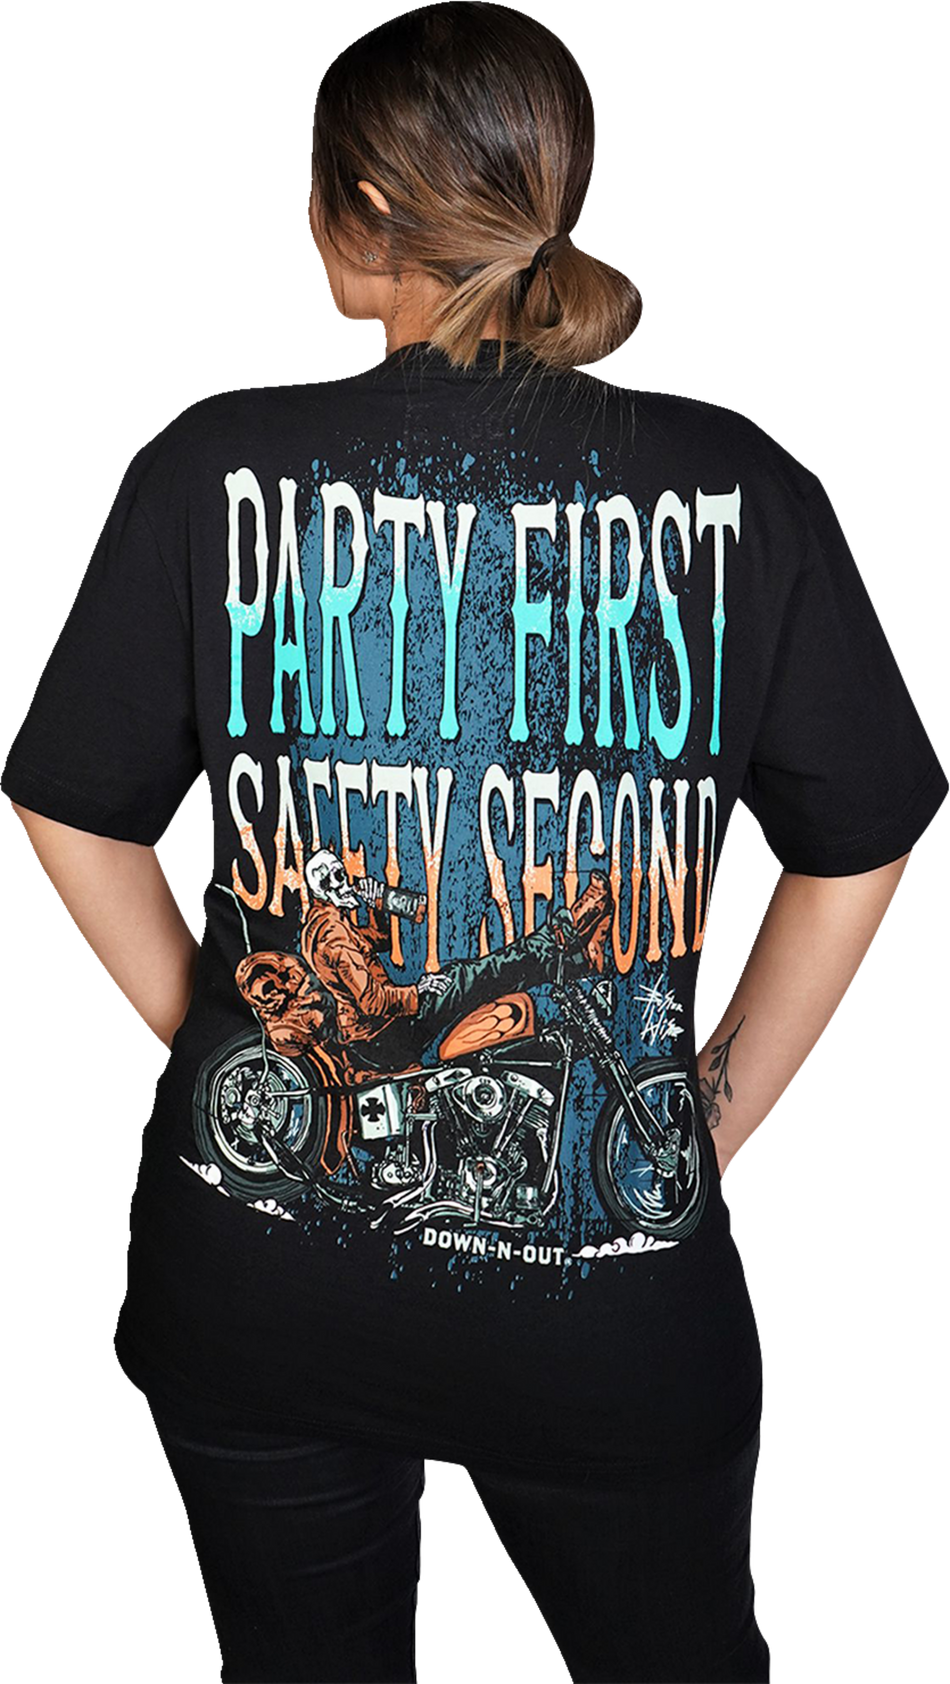 LETHAL THREAT Down-N-Out Party First Safety Second - Black - Medium DT10043M